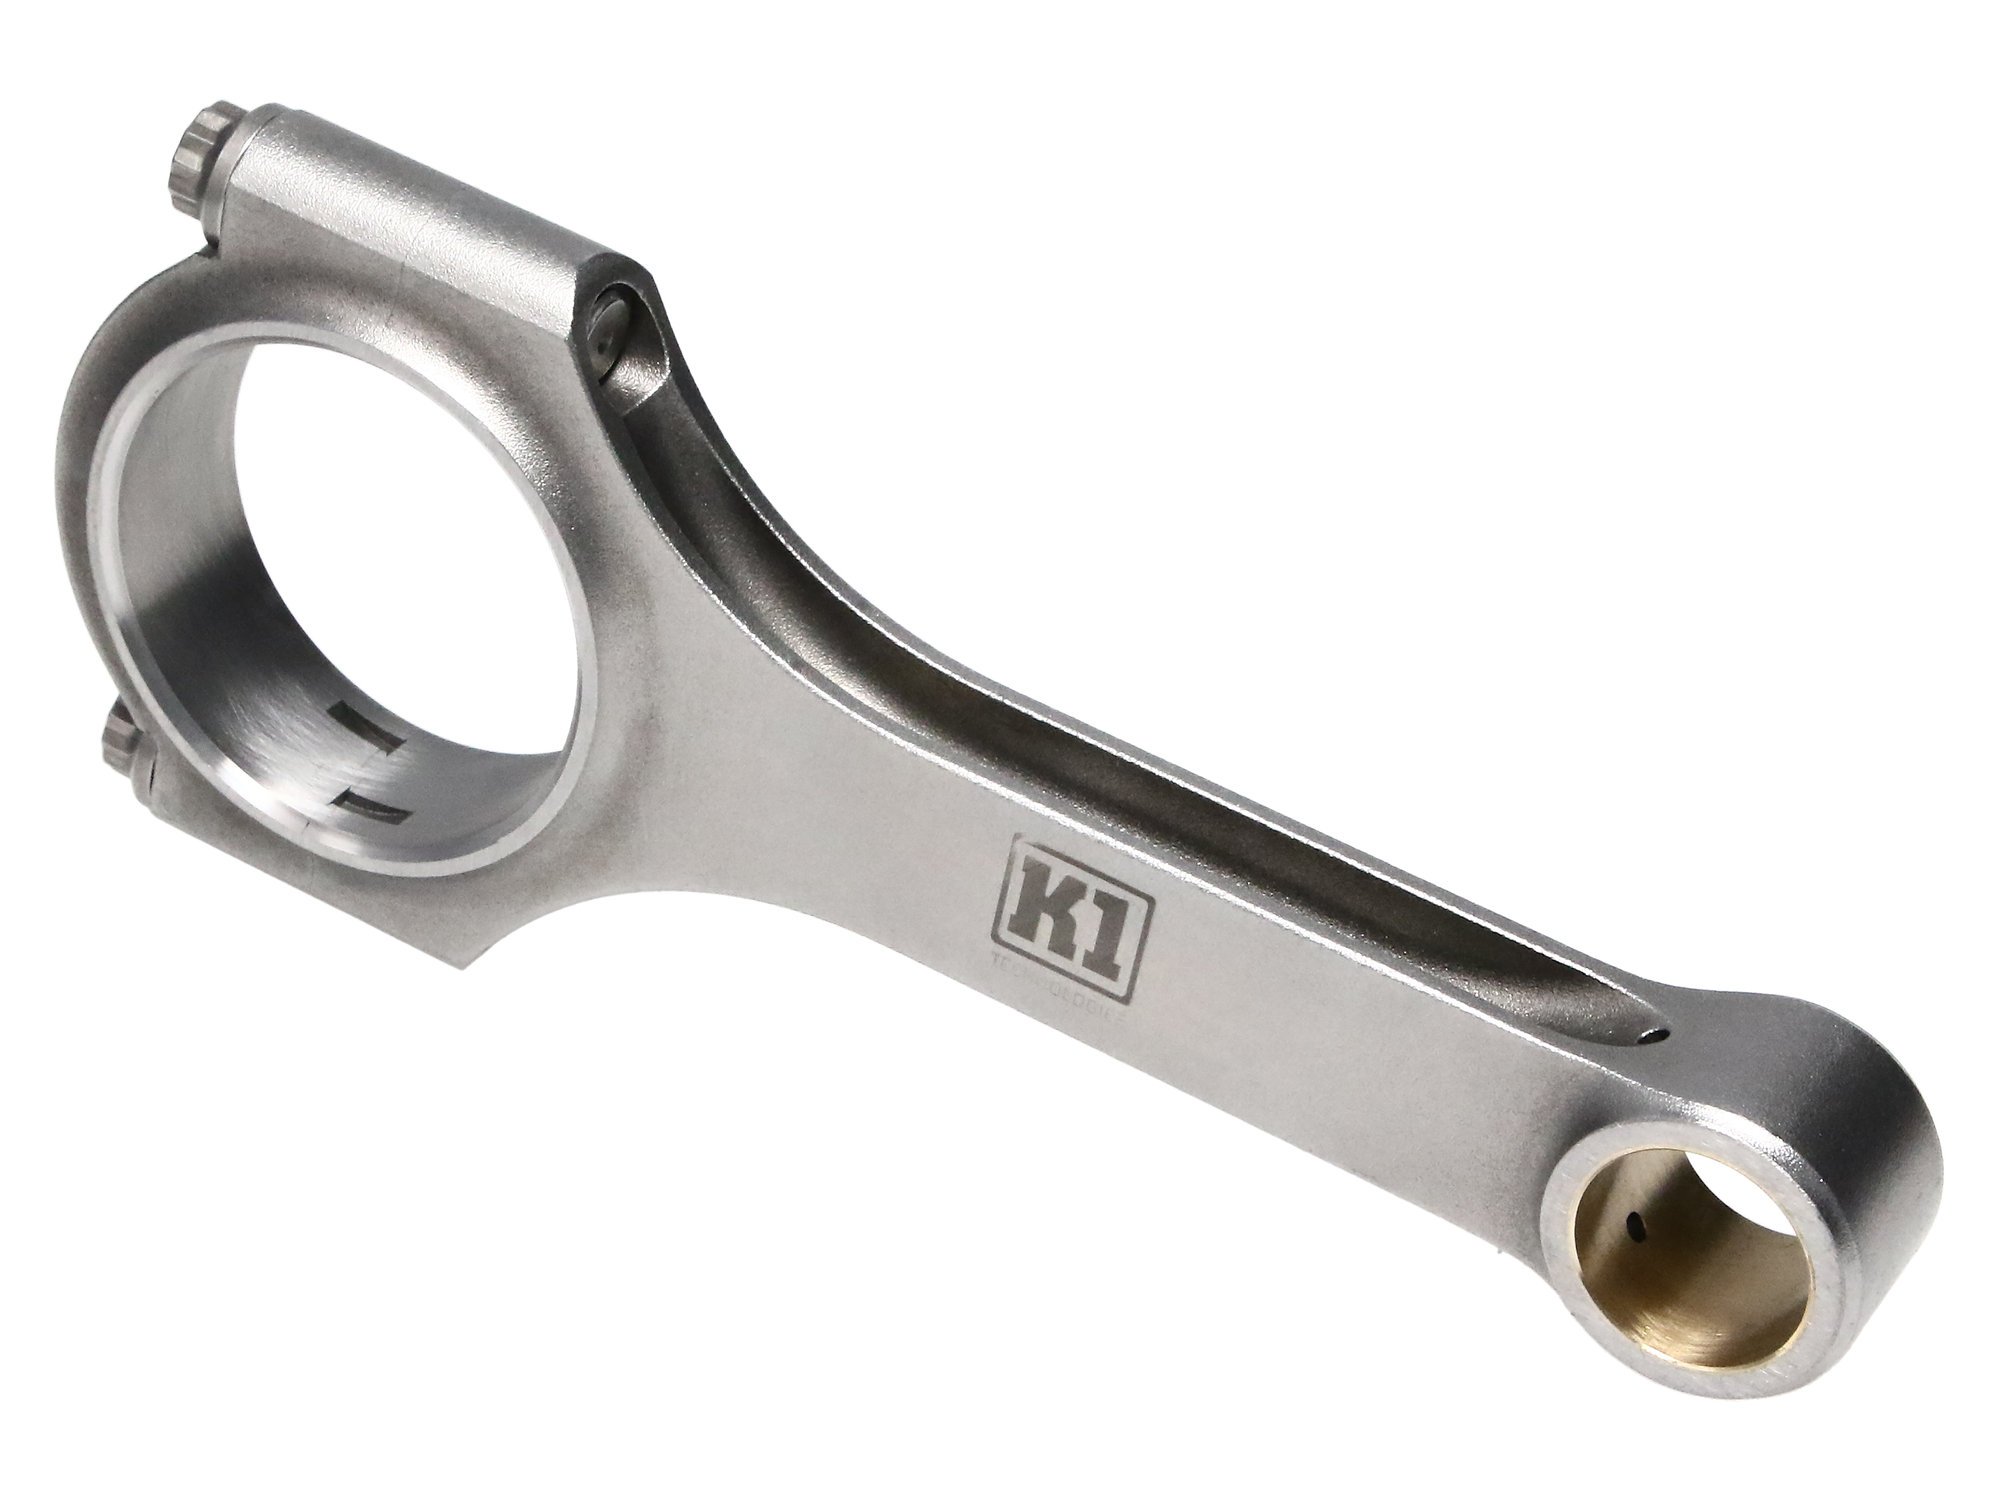 Shop High Quality Honda L15 Engine Connecting Rods - K1 Technologies